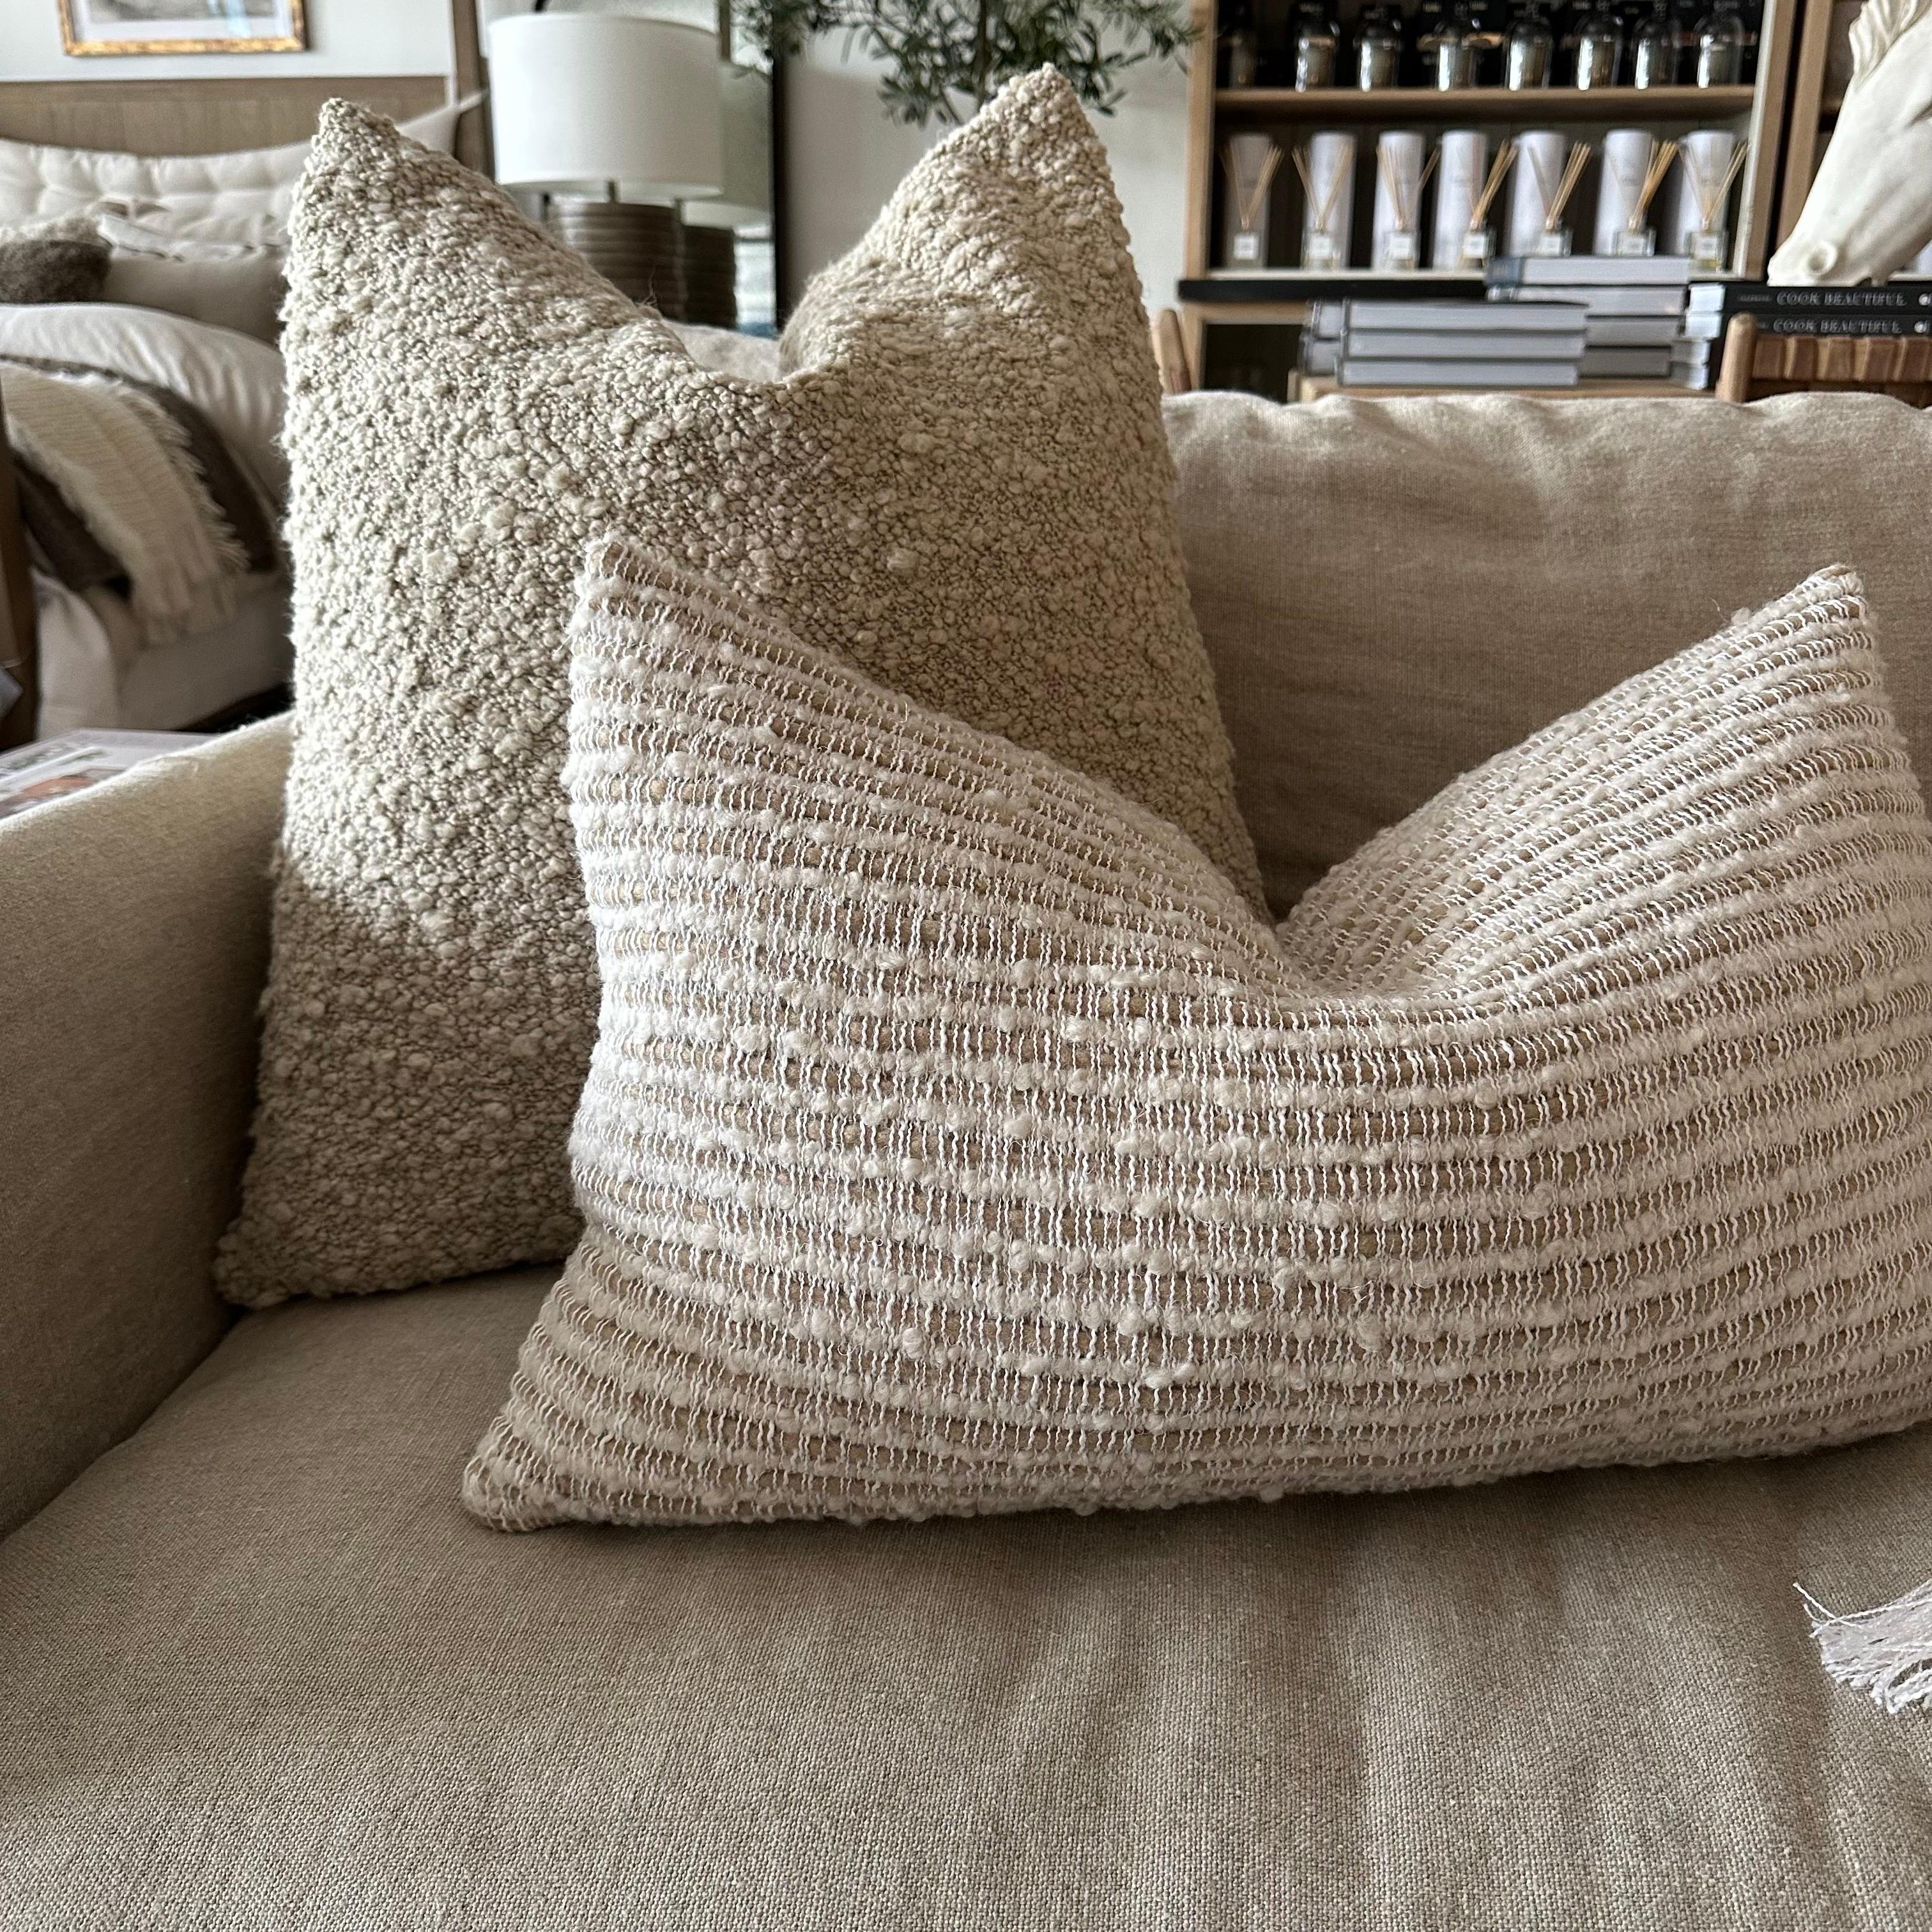 Textured Wool and Linen Lumbar Pillow In New Condition For Sale In Brea, CA